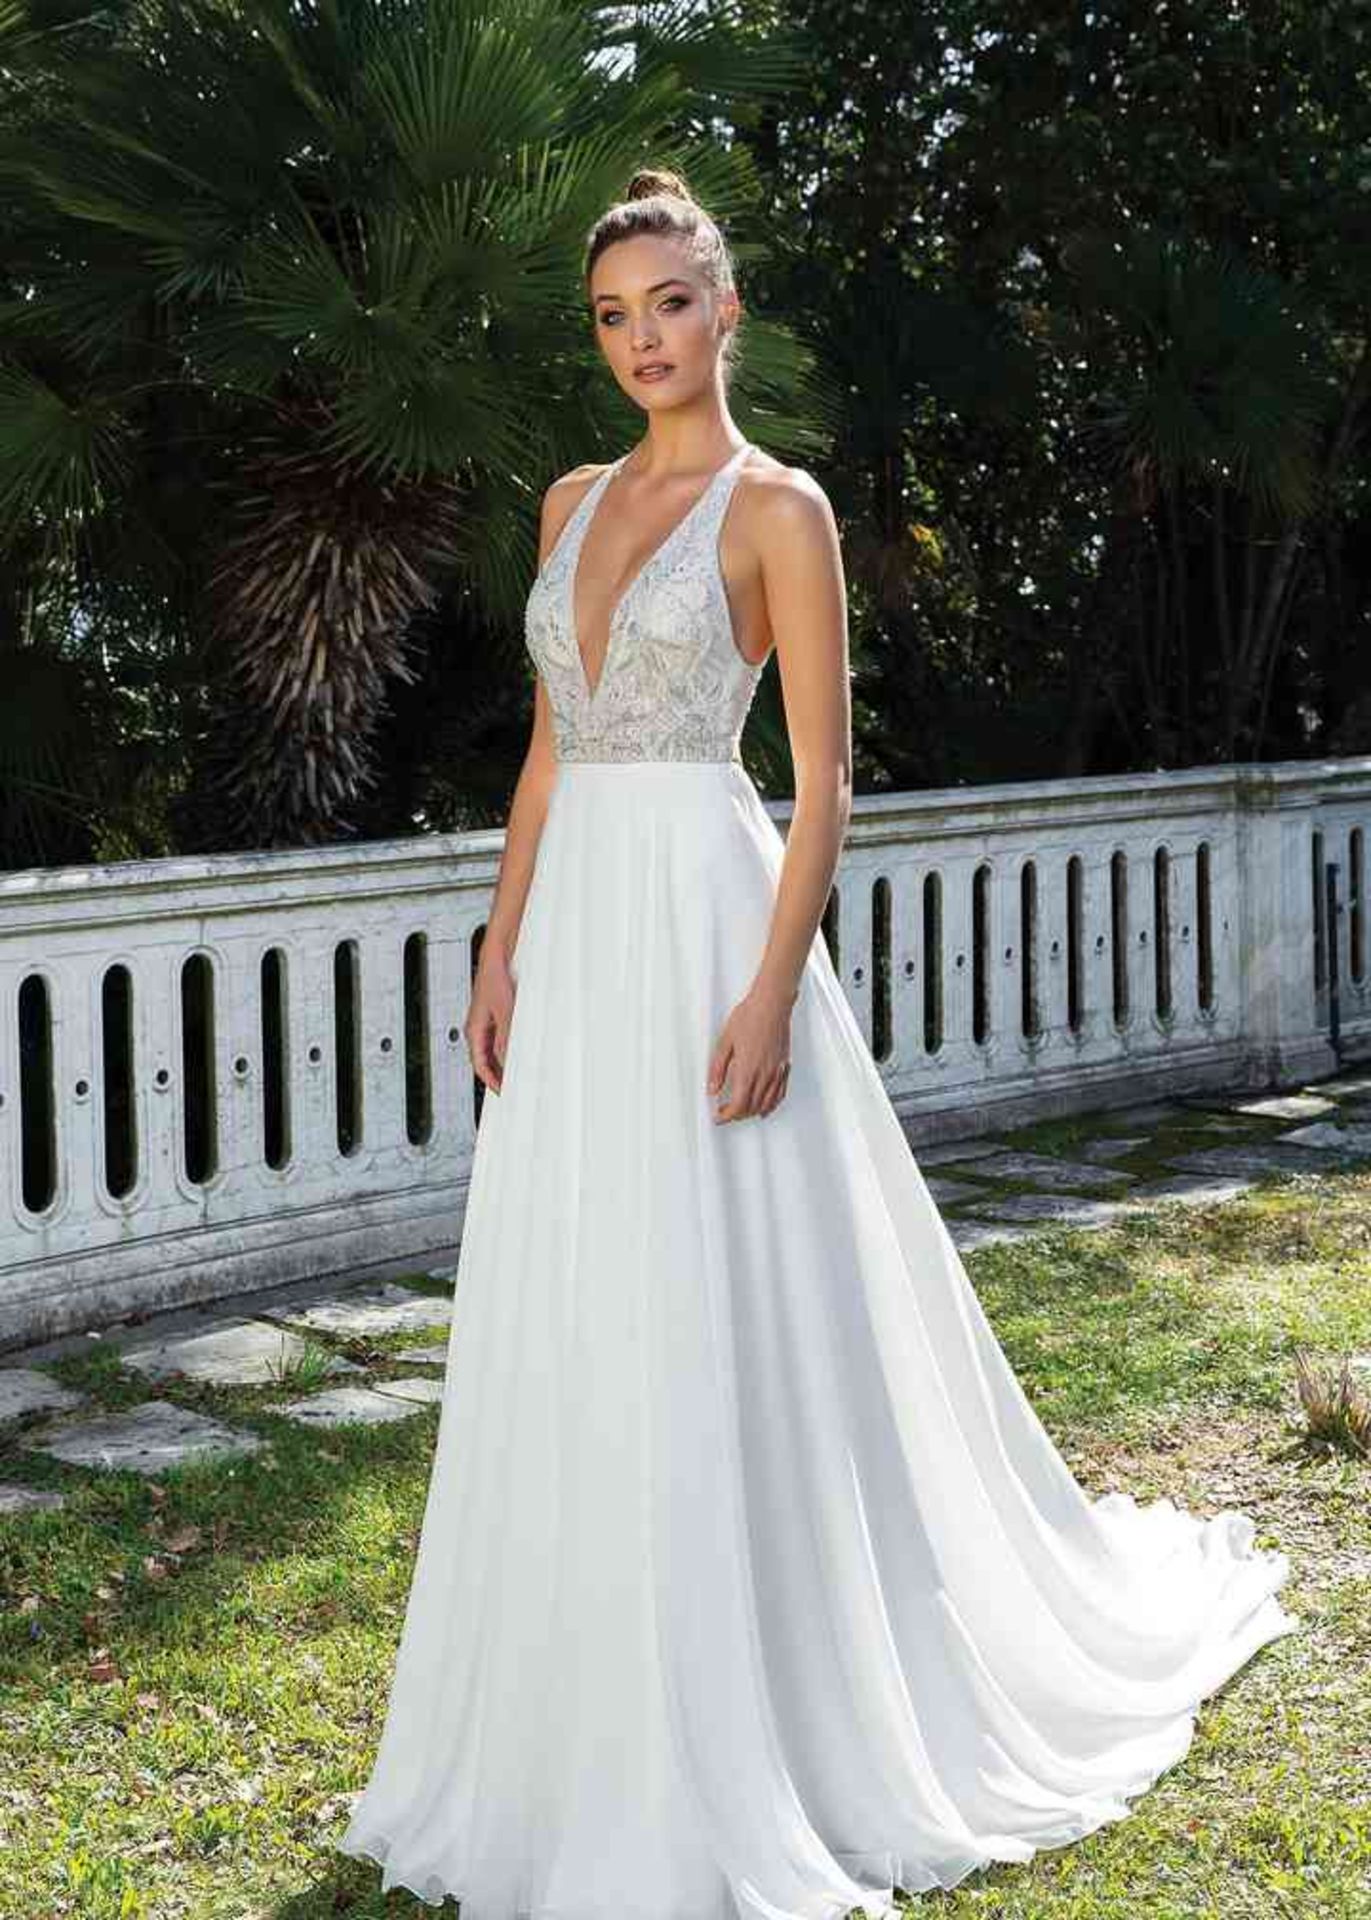 1 x Justin Alexander Chiffon V-neck, A-Line Beaded Bridal Gown Wedding Dress - Size 12 - RRP £1,495 - Image 7 of 7